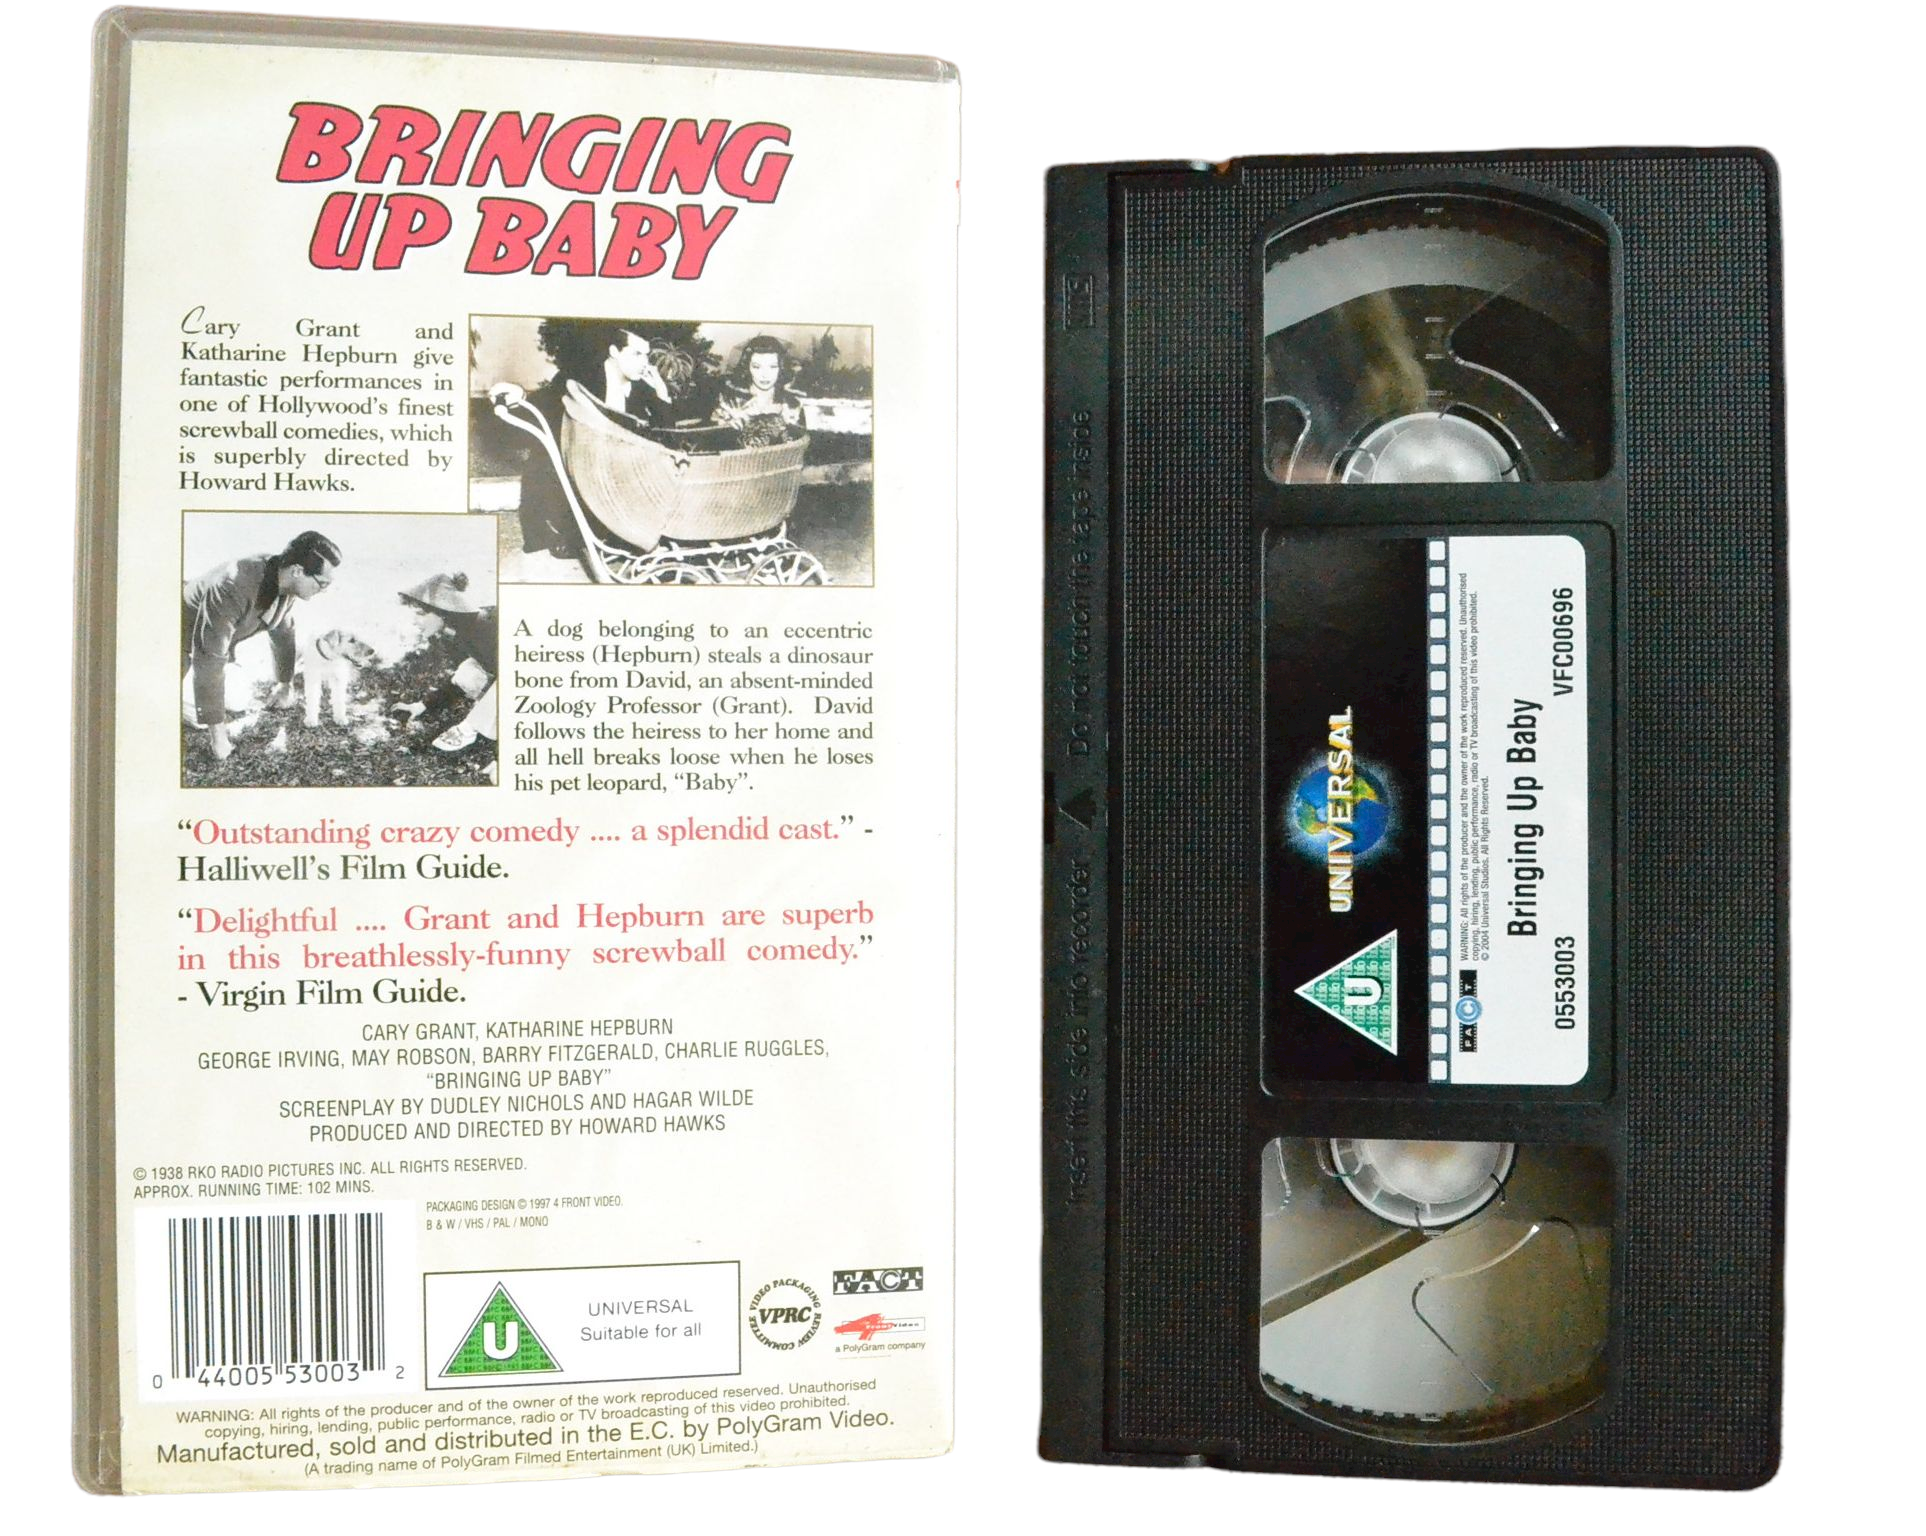 Bringing Up Baby - Cary Grant - 4Front Video - Vintage - Pal VHS-